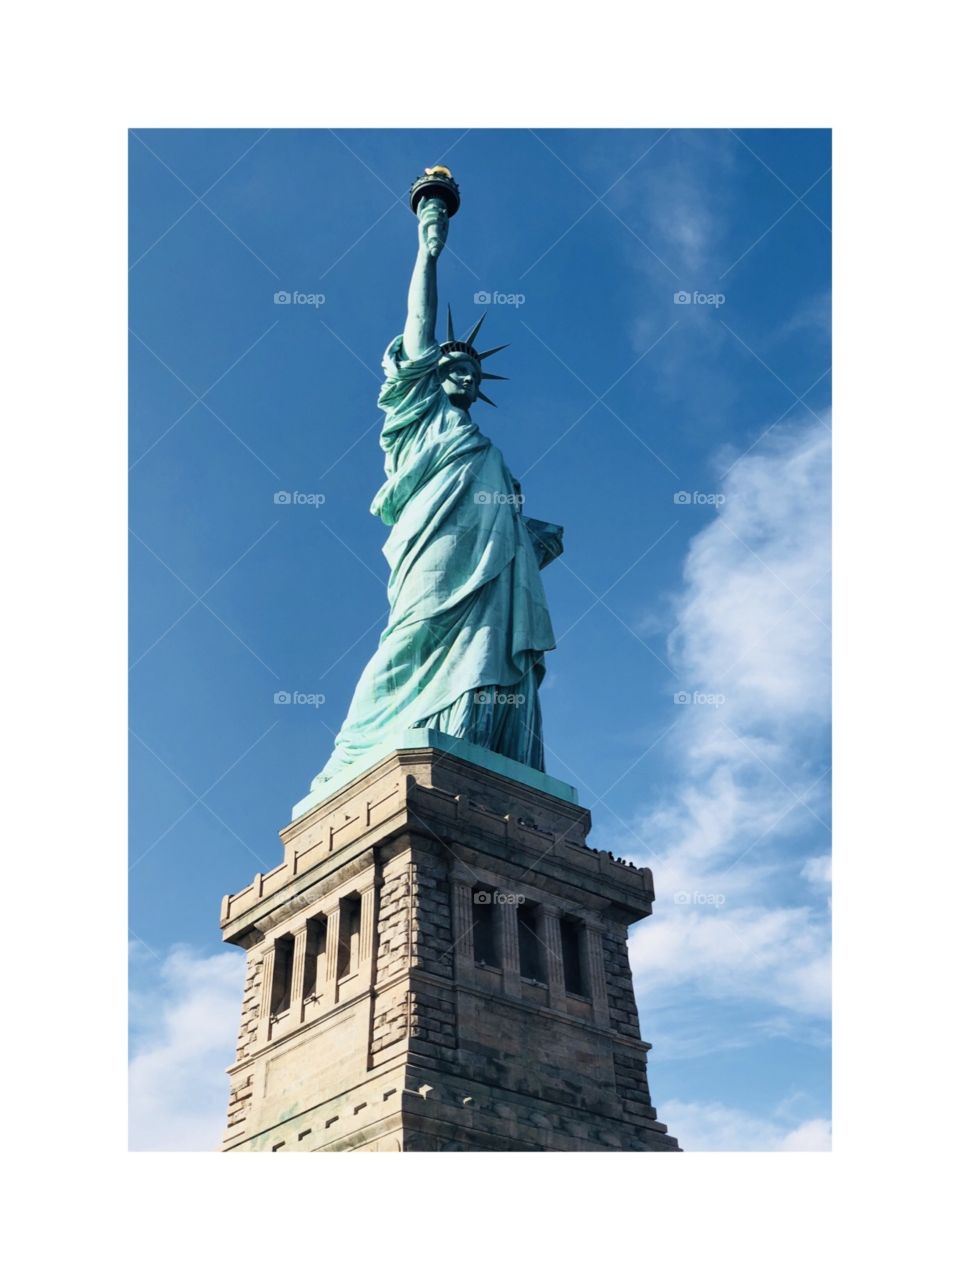 “Give me your tired, your poor, your huddled masses yearning to breathe free, the wretched refuse of your teeming shore,” she wrote. “Send these, the homeless, tempest-tossed to me, I lift my lamp beside the golden door!”